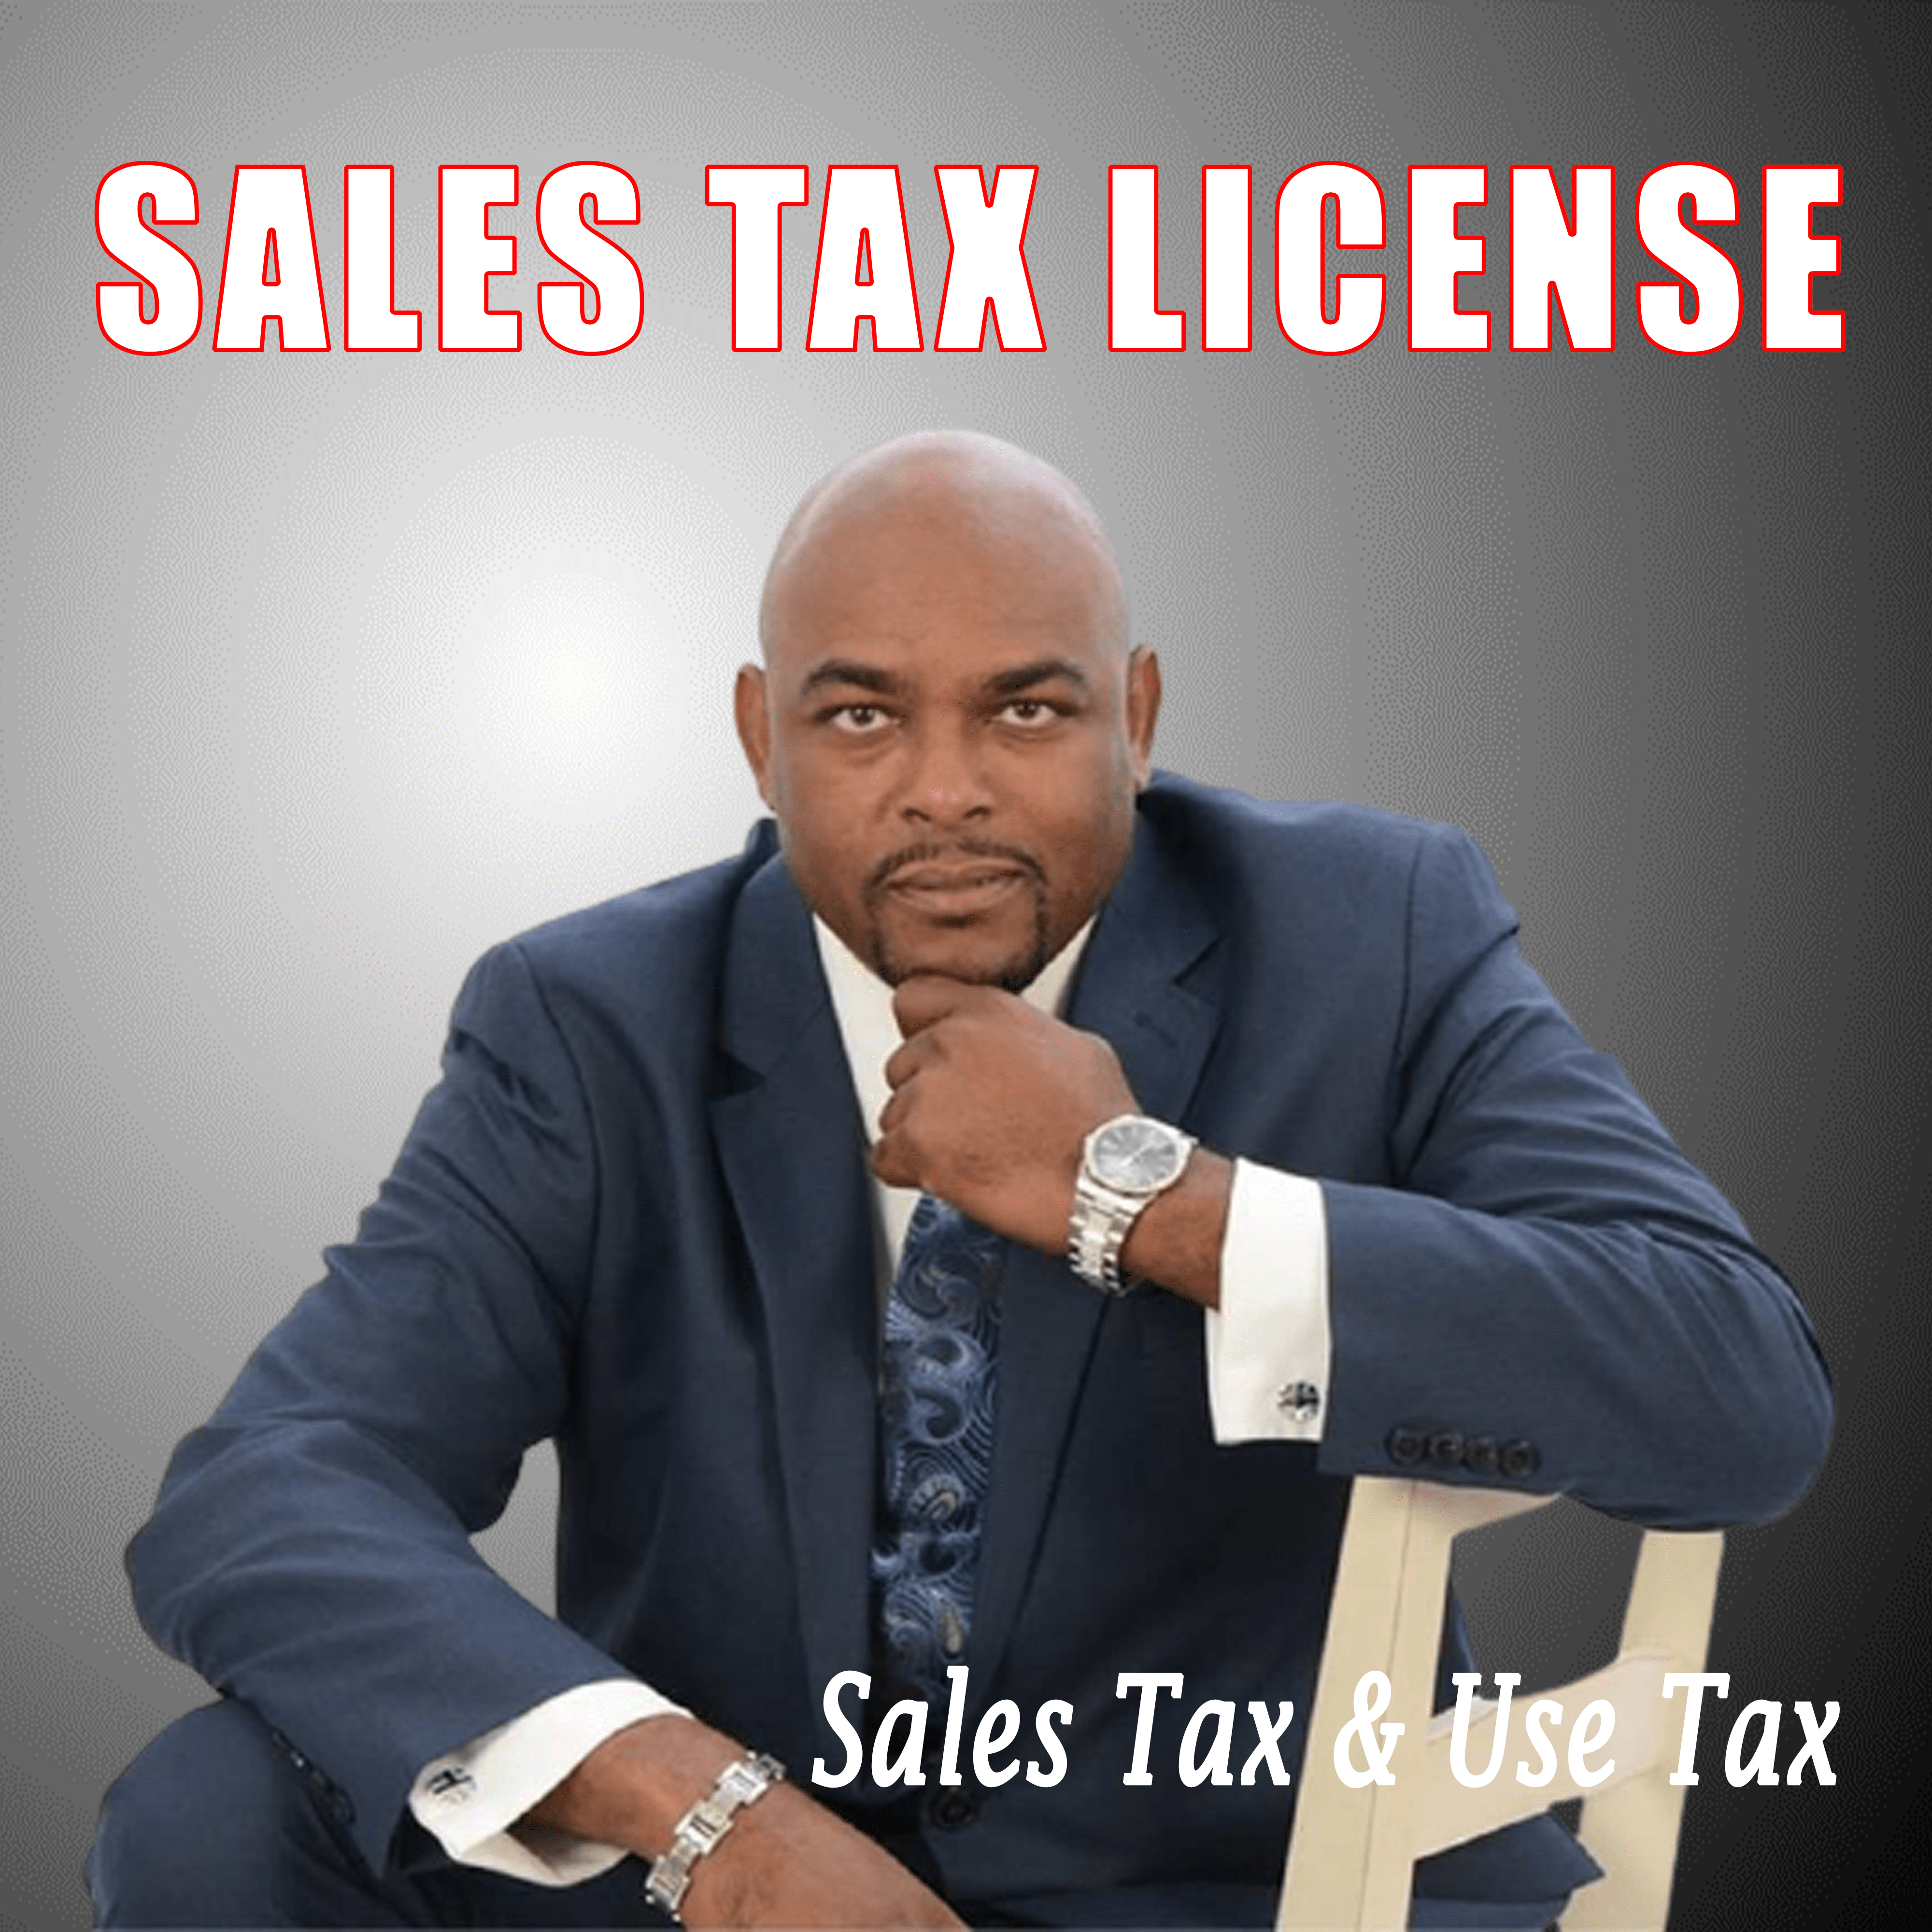 A sales tax license, also known as a sales tax permit or registration in some states, is an agreement with the state tax agency to collect and remit sales tax.